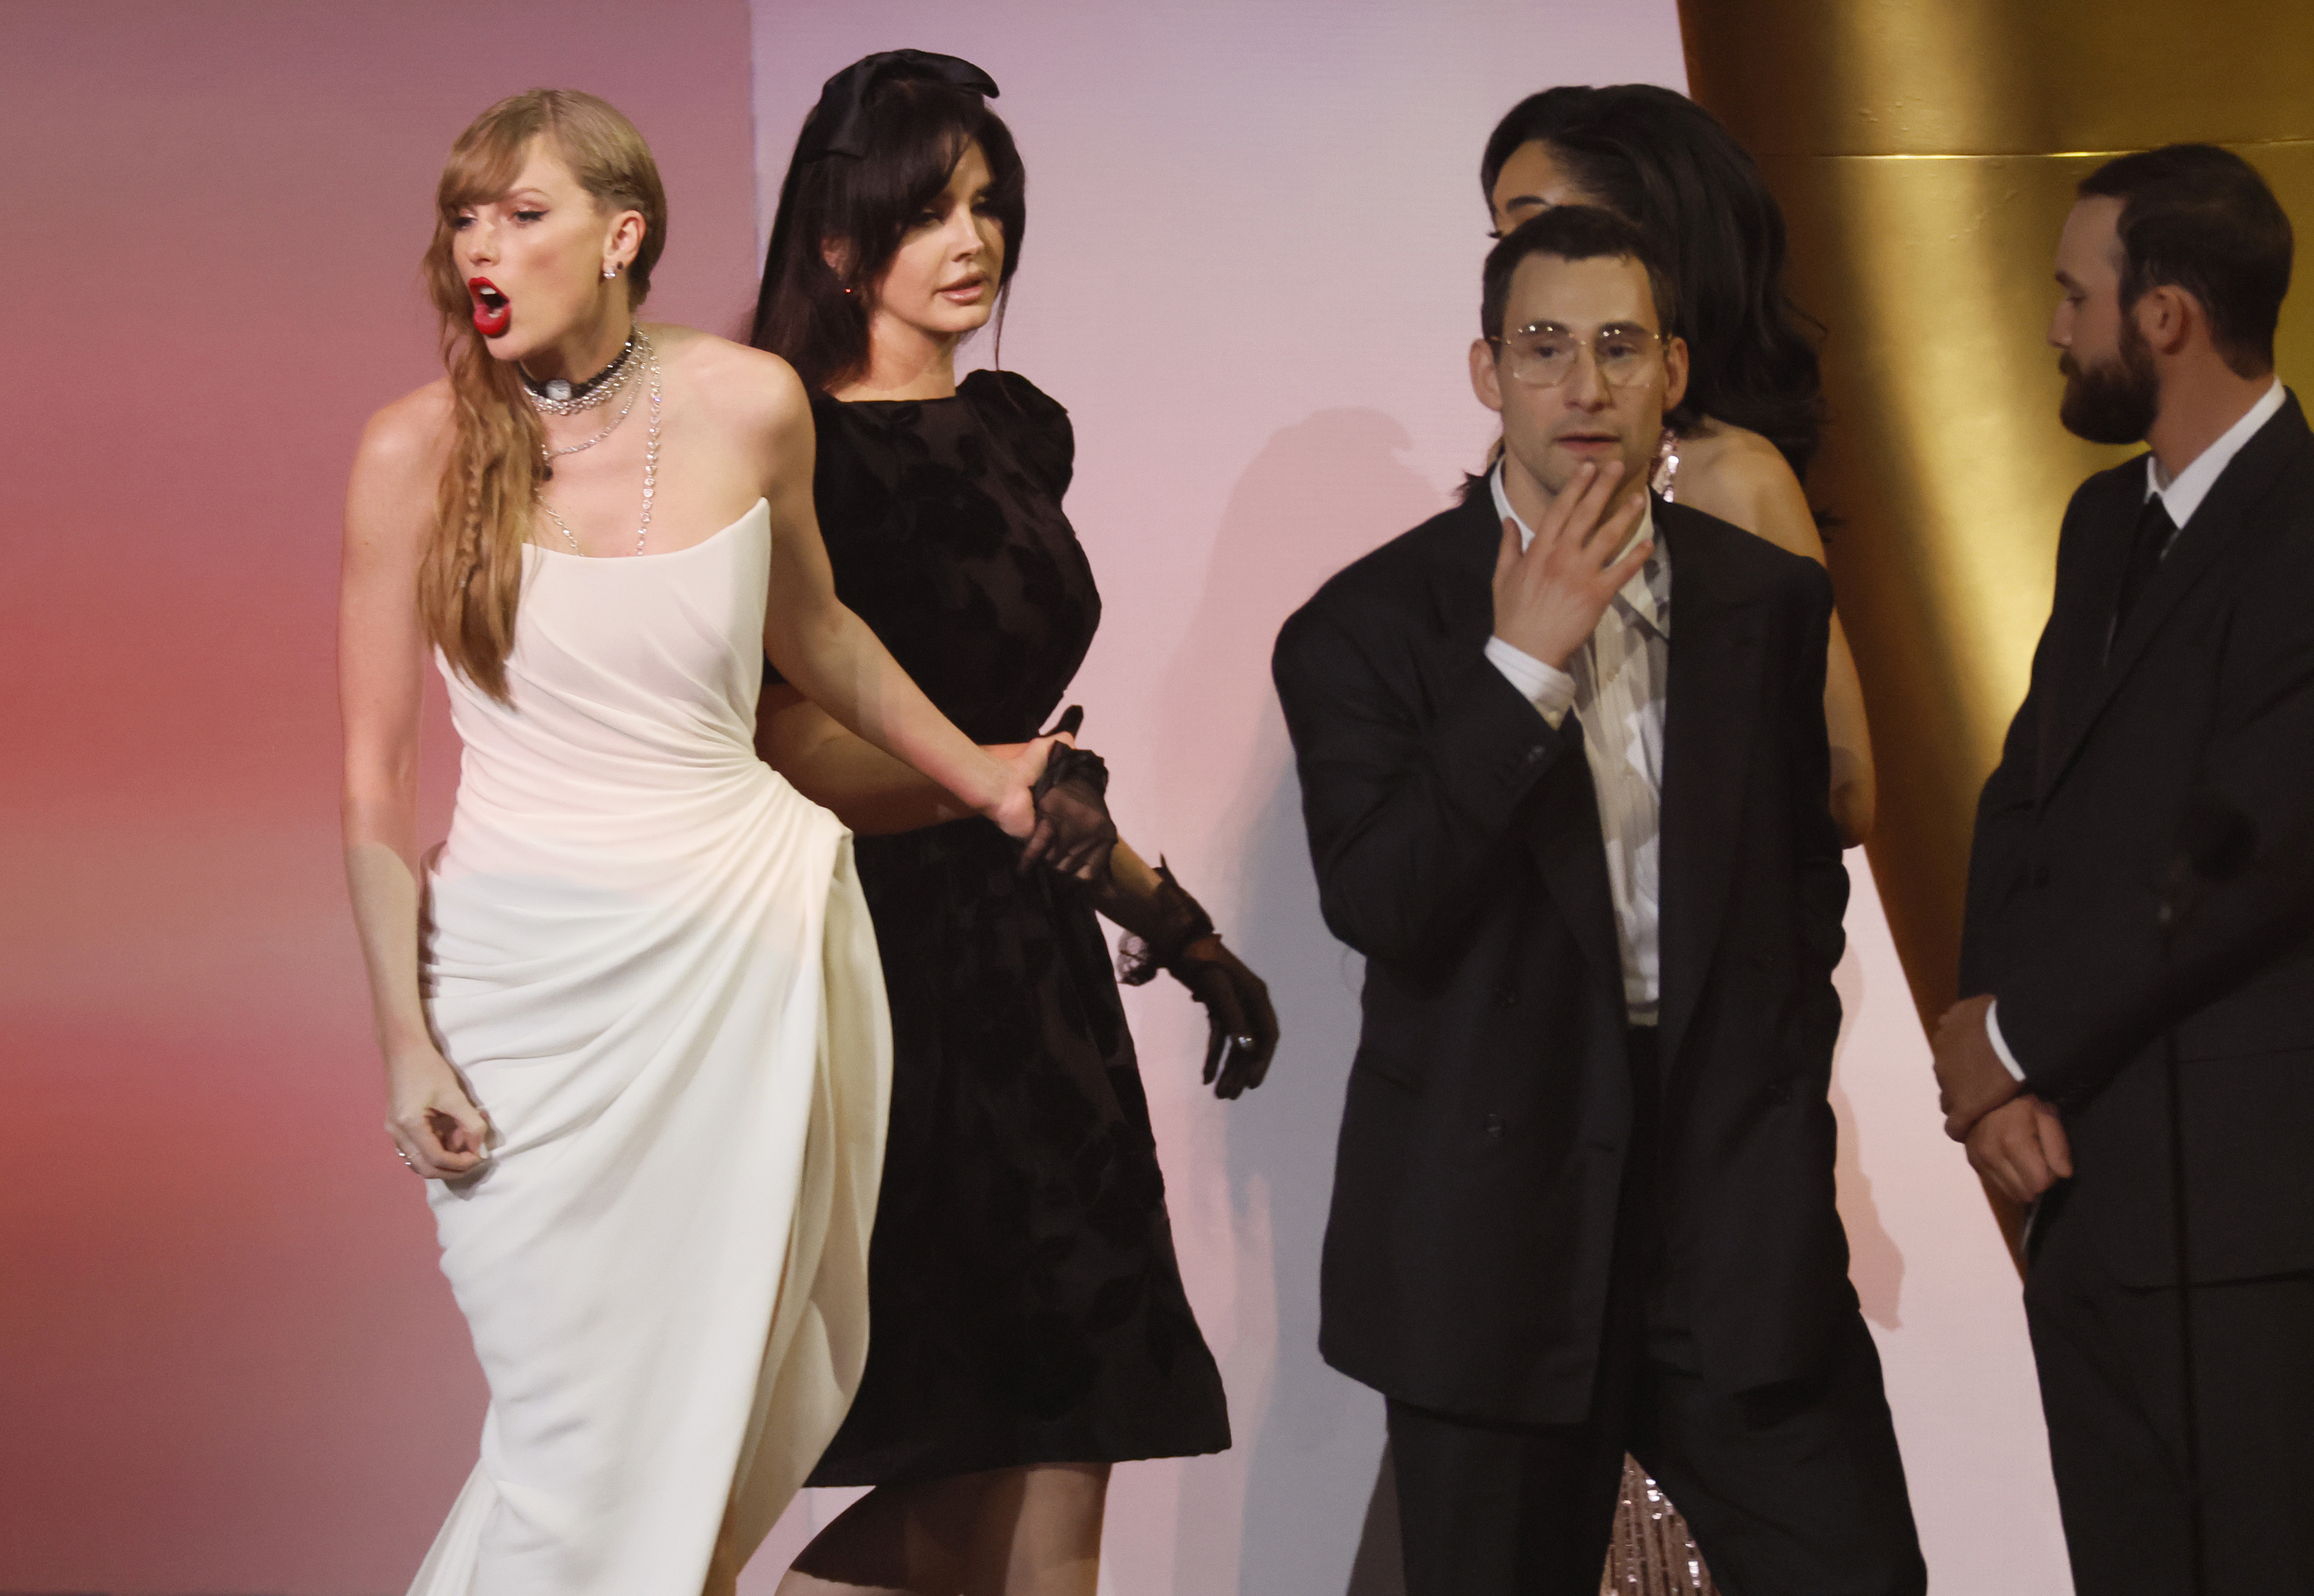 Close-up of Taylor onstage with Lana and others